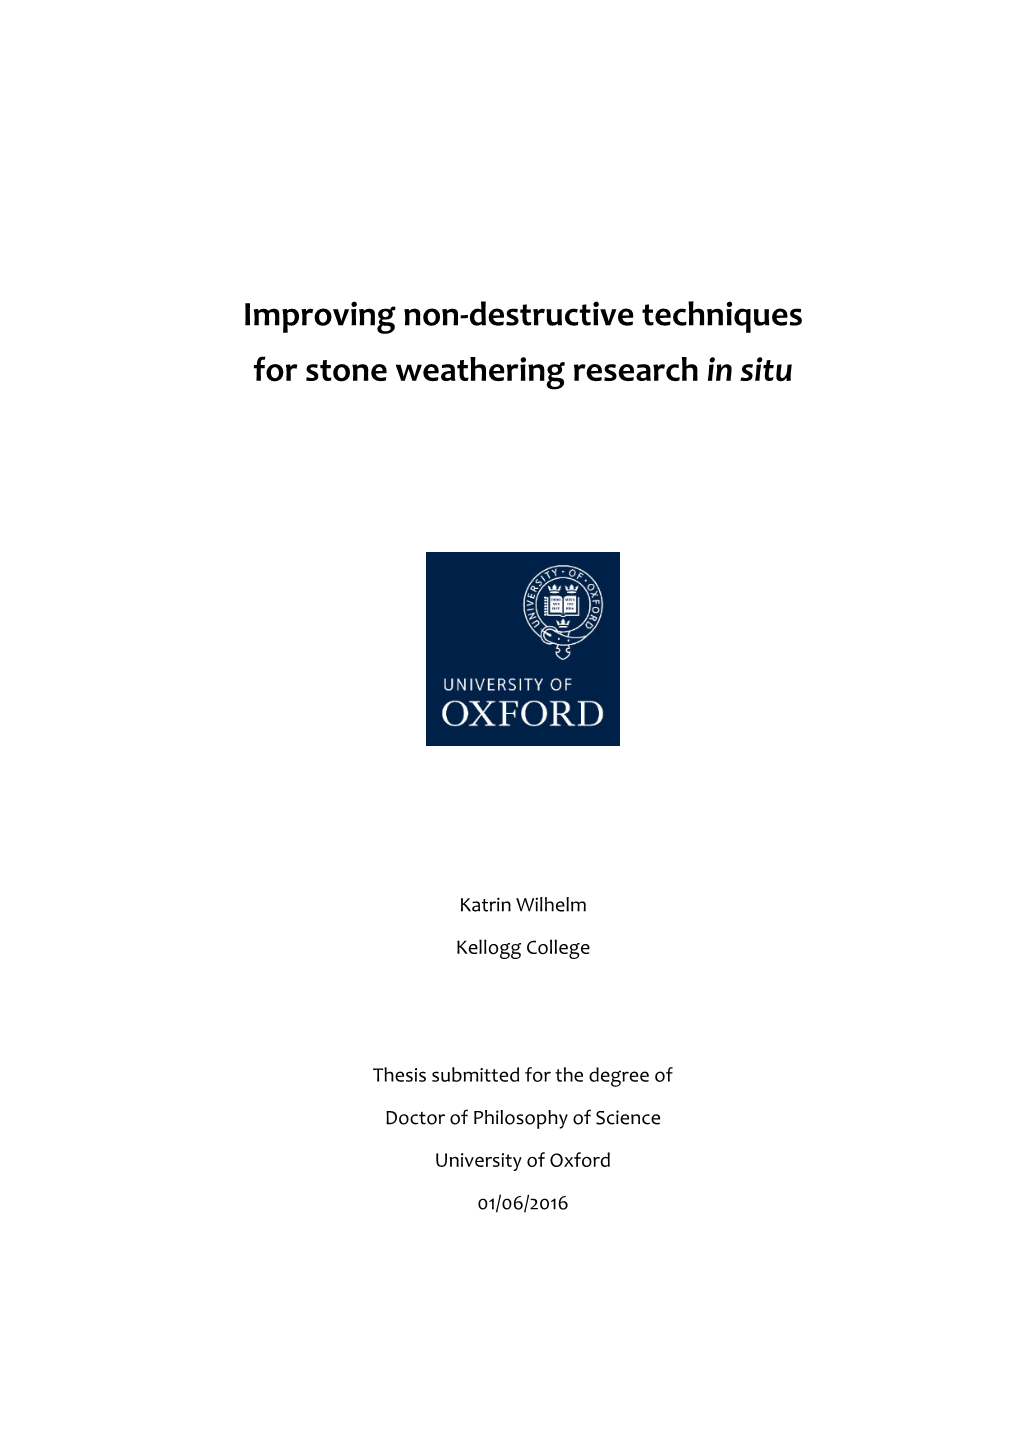 Improving Non-Destructive Techniques for Stone Weathering Research in Situ